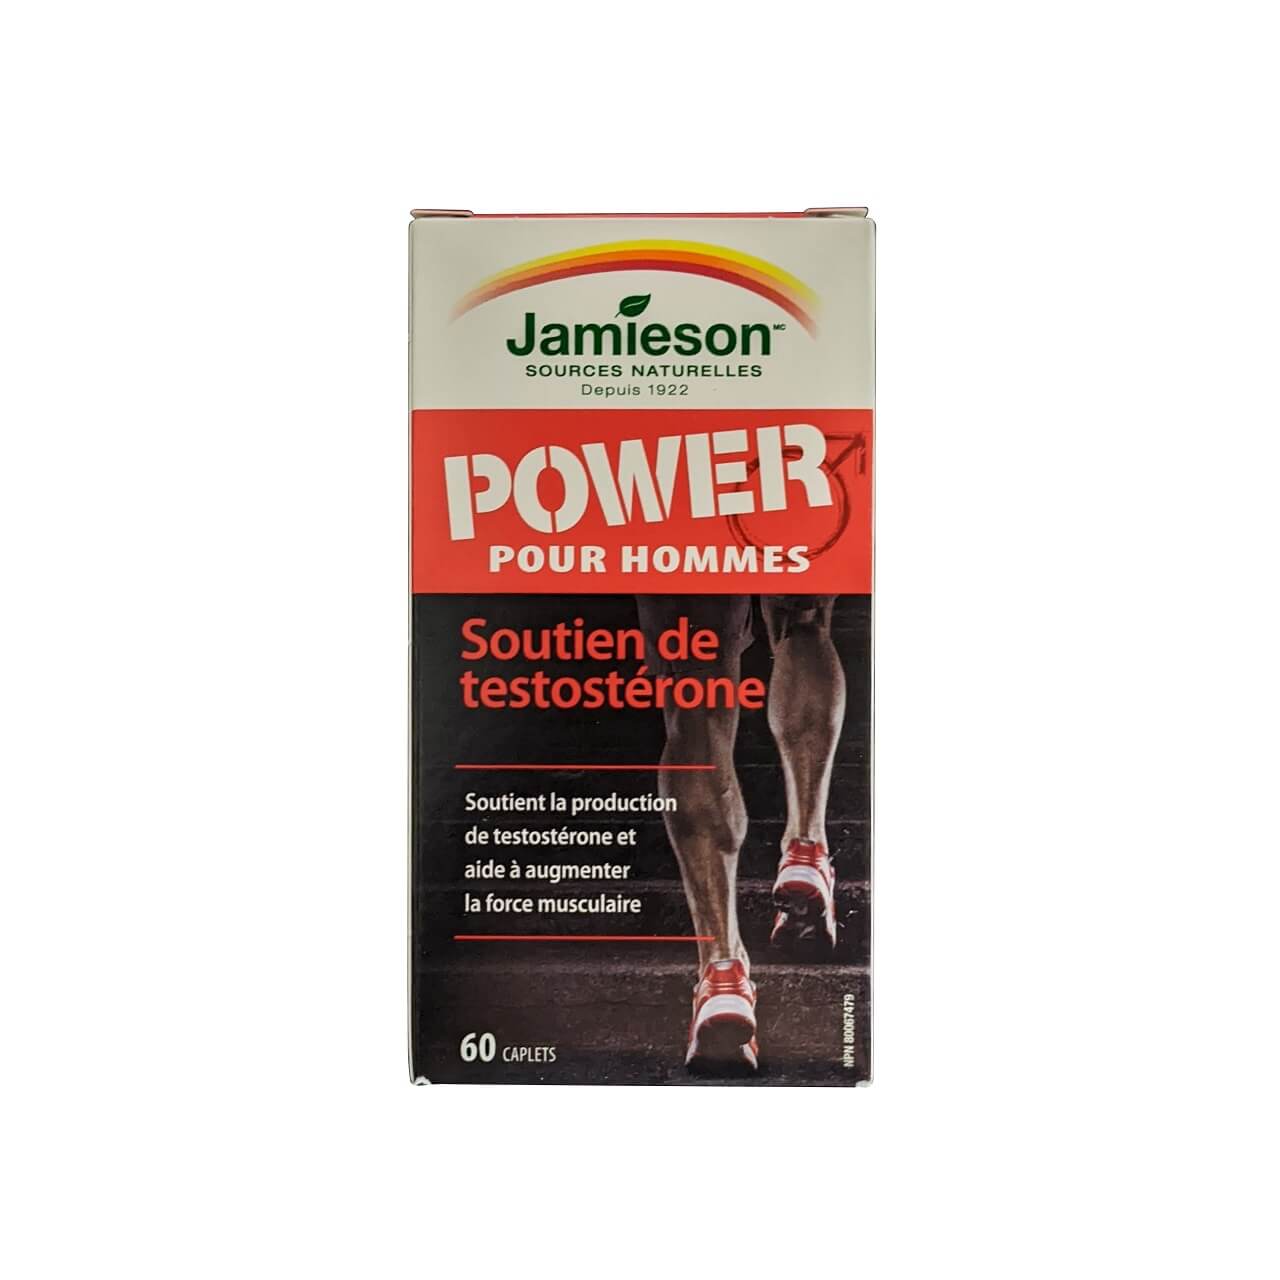 Product label for Jamieson Power for Men Testorone (60 caplets) in French